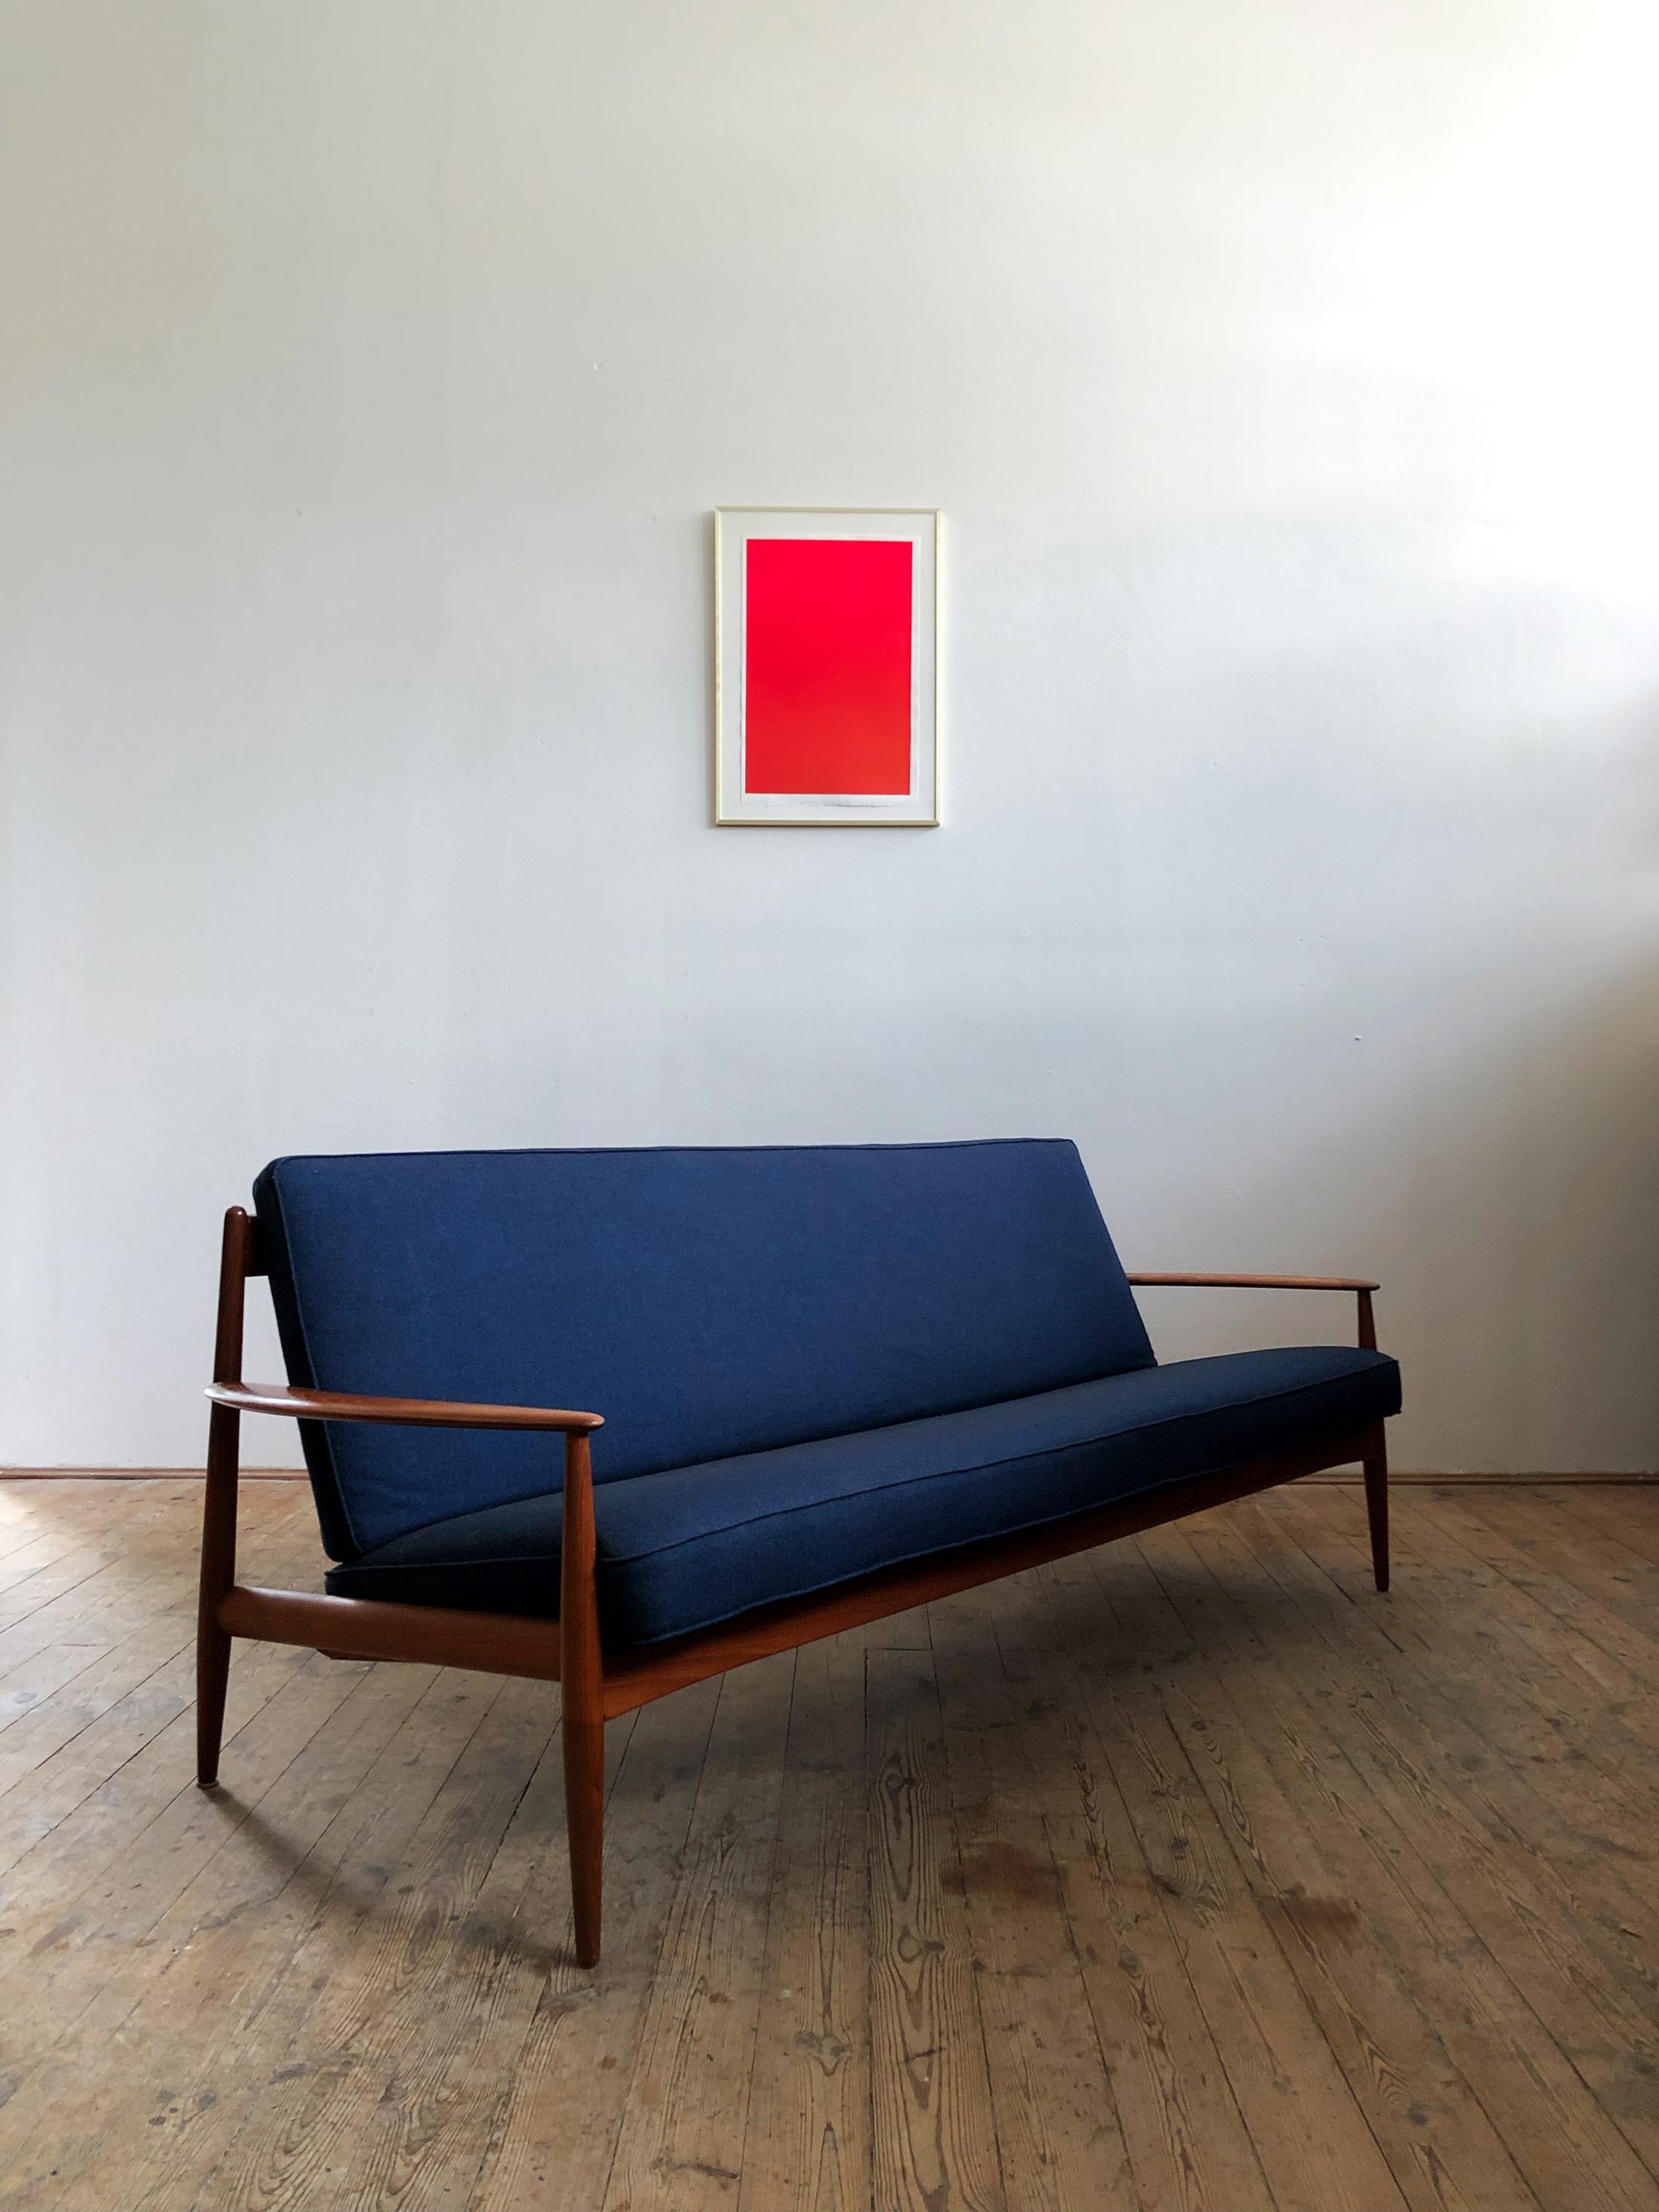 Early vintage version of Grete Jalk's teak sofa produced by France & Daverkosen that shows high quality Danish craftsmanship. The sofa comes in its original state with original -rather soft- spring-loaded padding and original dark blue upholstery.